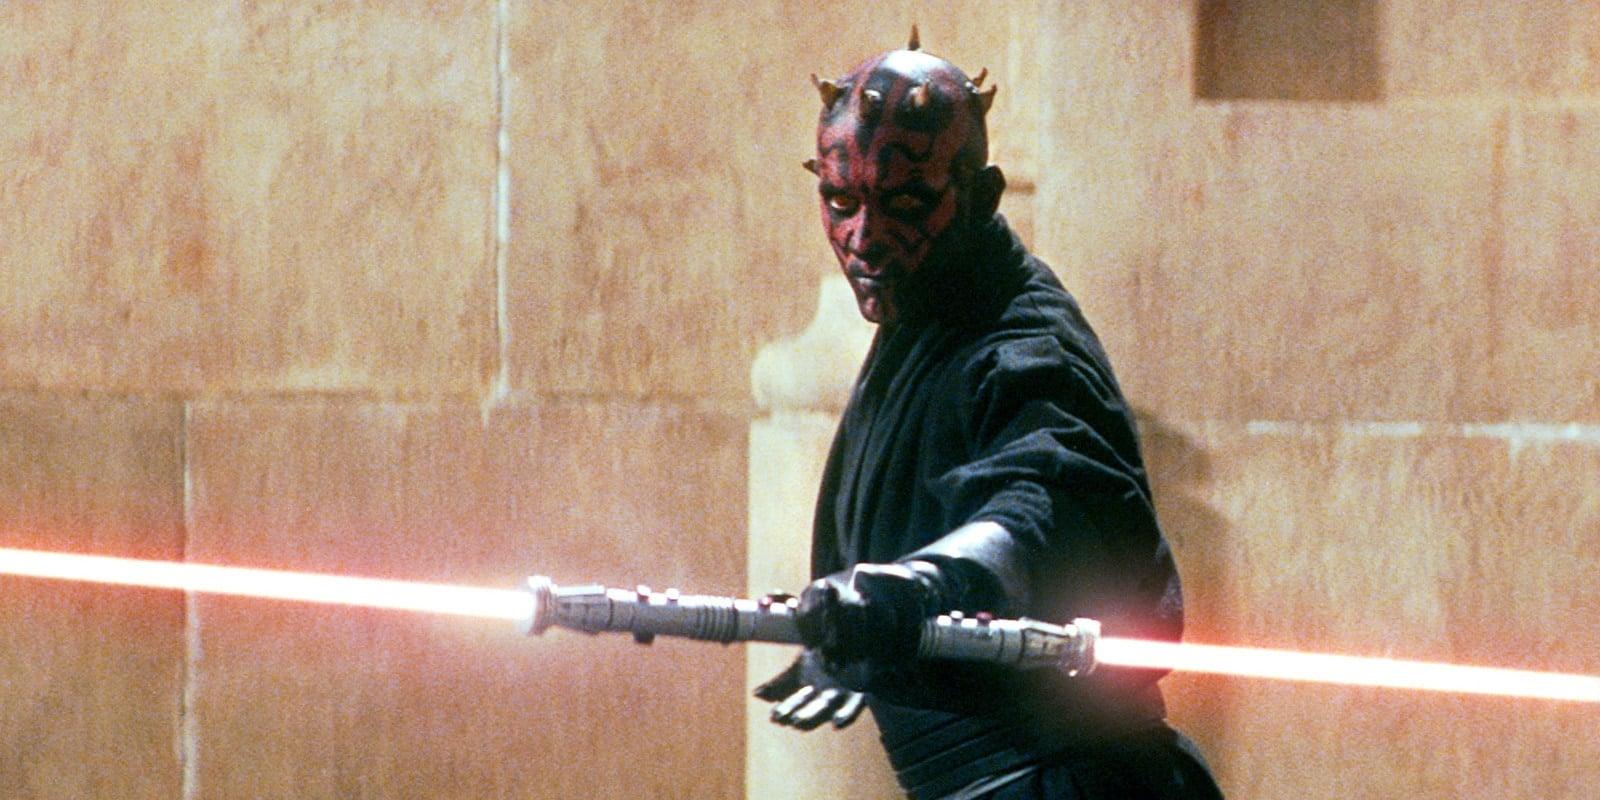 Darth Maul with his two-sided lightsaber in Star Wars Episode 1: The Phantom Menace.